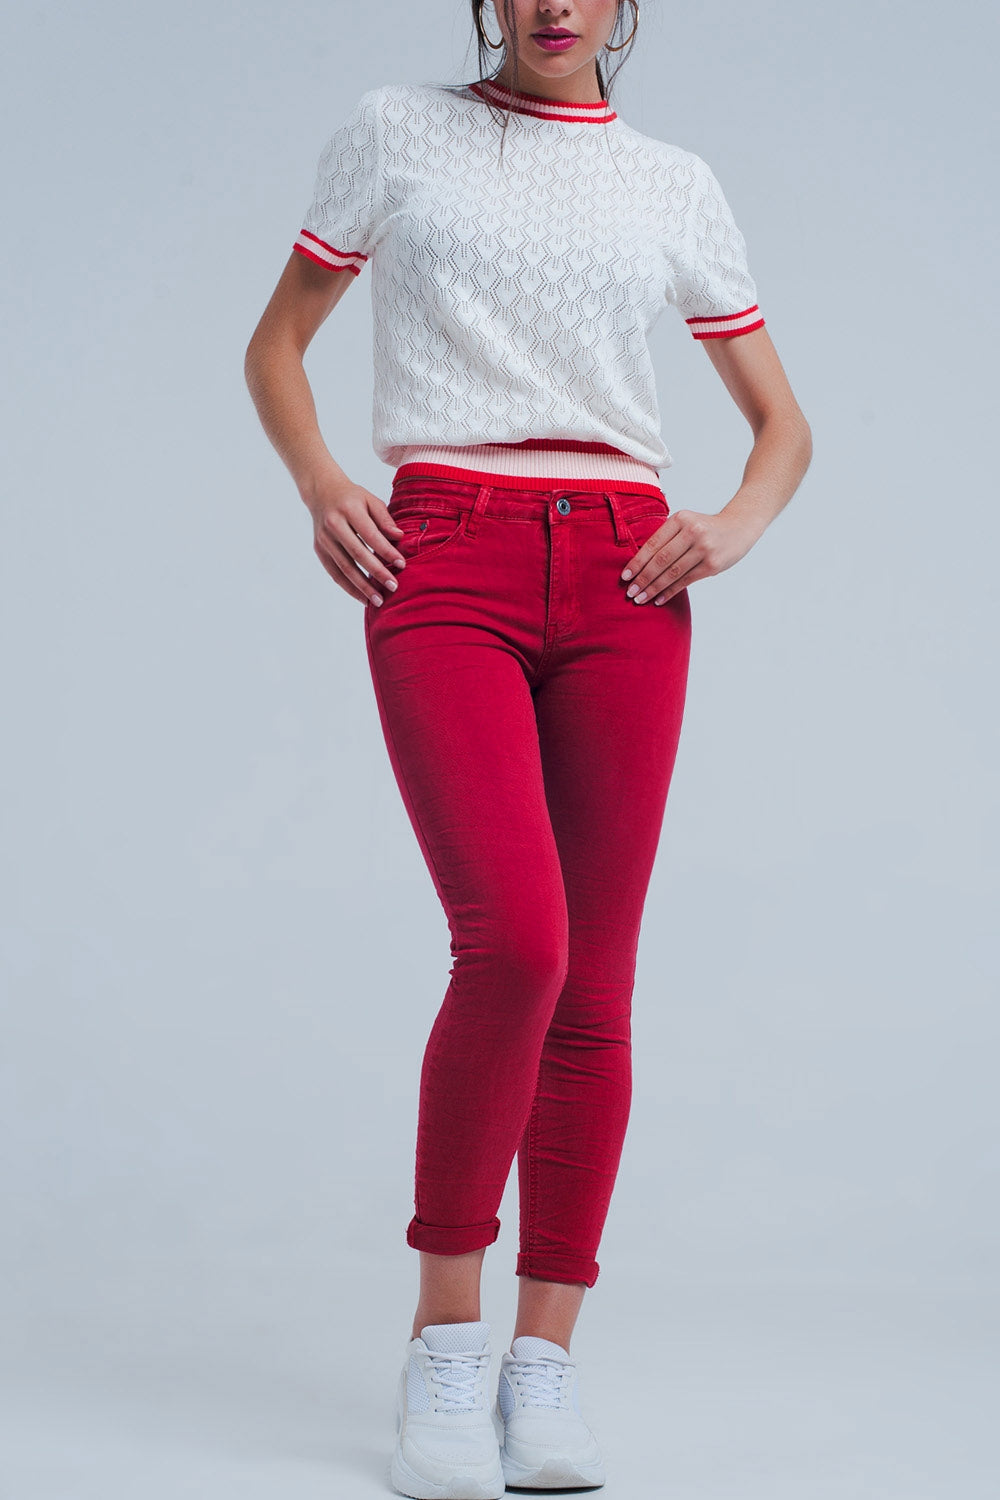 Q2 Red mid rise skinny jeans